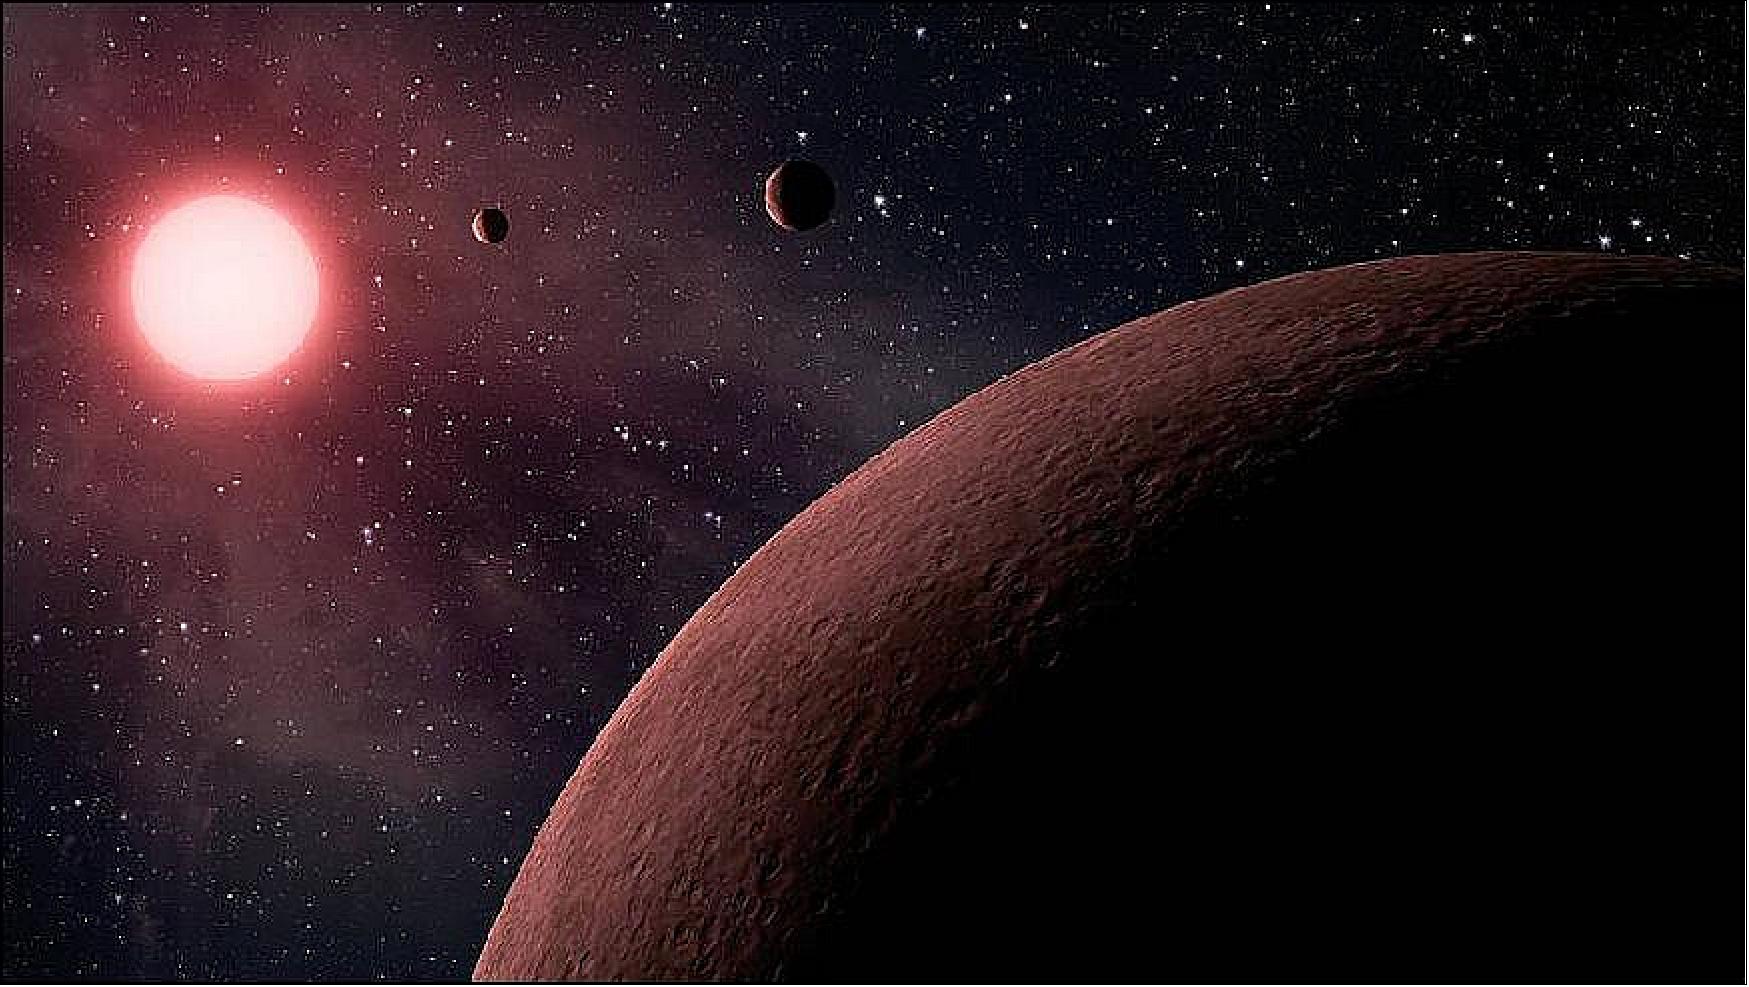 Figure 37: NASA’s Kepler space telescope team has identified 219 new planet candidates, 10 of which are near-Earth size and in the habitable zone of their star (image credit: NASA/JPL-Caltech)